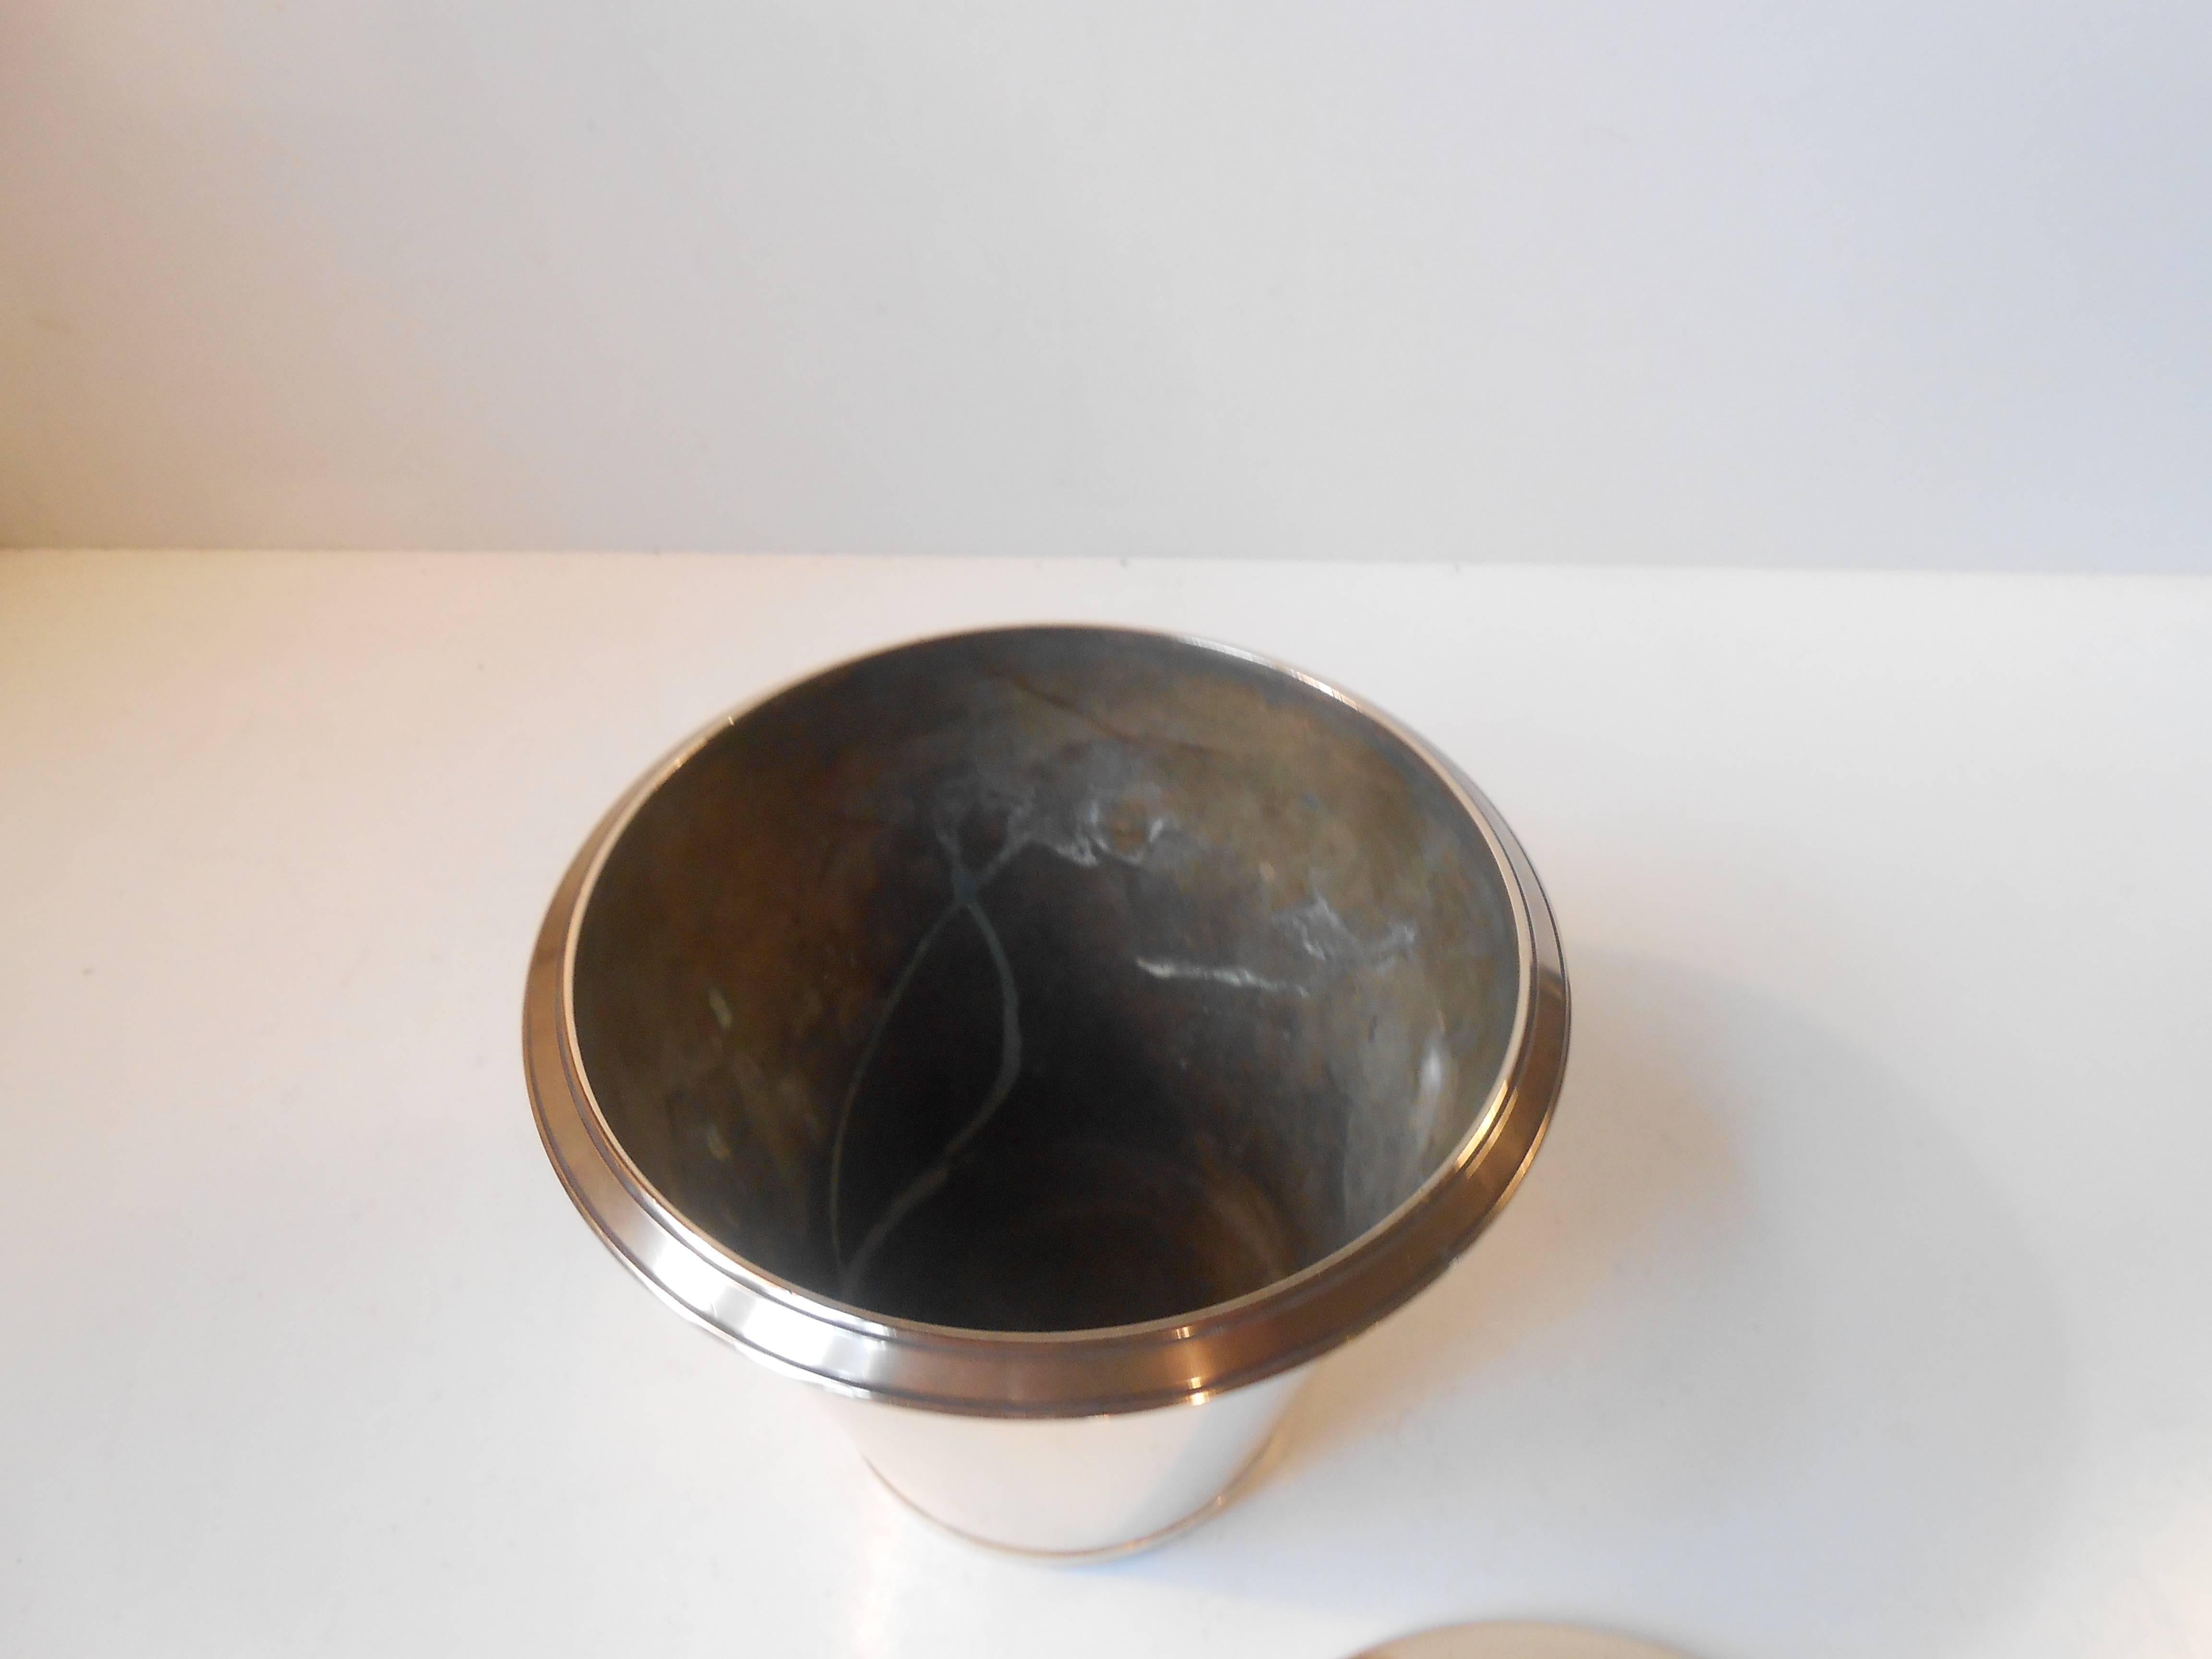 1930s Bronze Jar with an Organic Shape & Danish Art Deco Styling: Stamped ATO 1